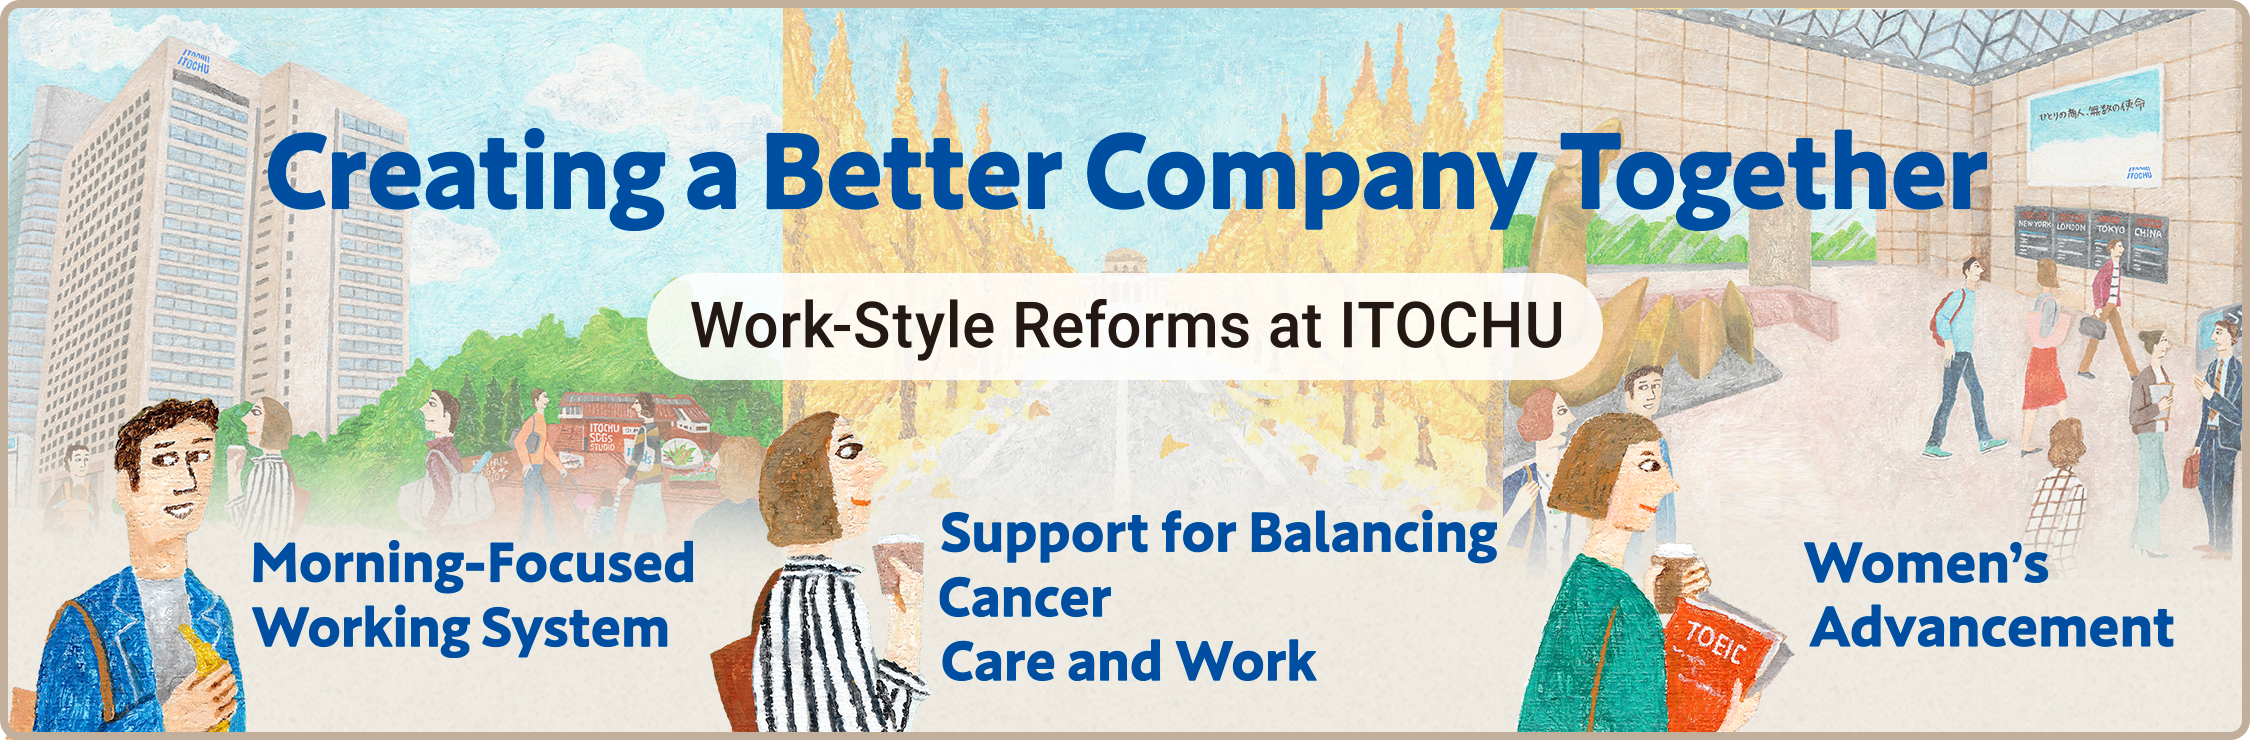 Work-Style Reforms at ITOCHU